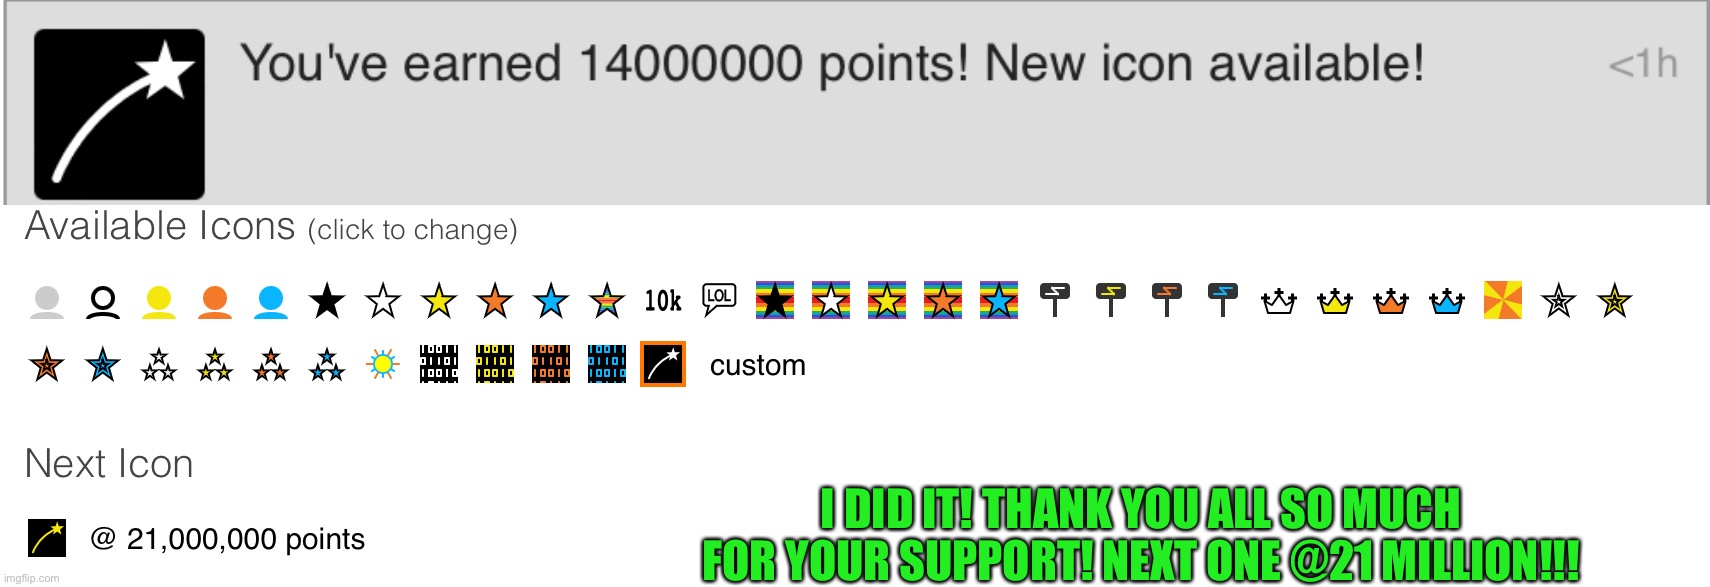 New icon!!! | I DID IT! THANK YOU ALL SO MUCH FOR YOUR SUPPORT! NEXT ONE @21 MILLION!!! | image tagged in icons,imgflip points | made w/ Imgflip meme maker